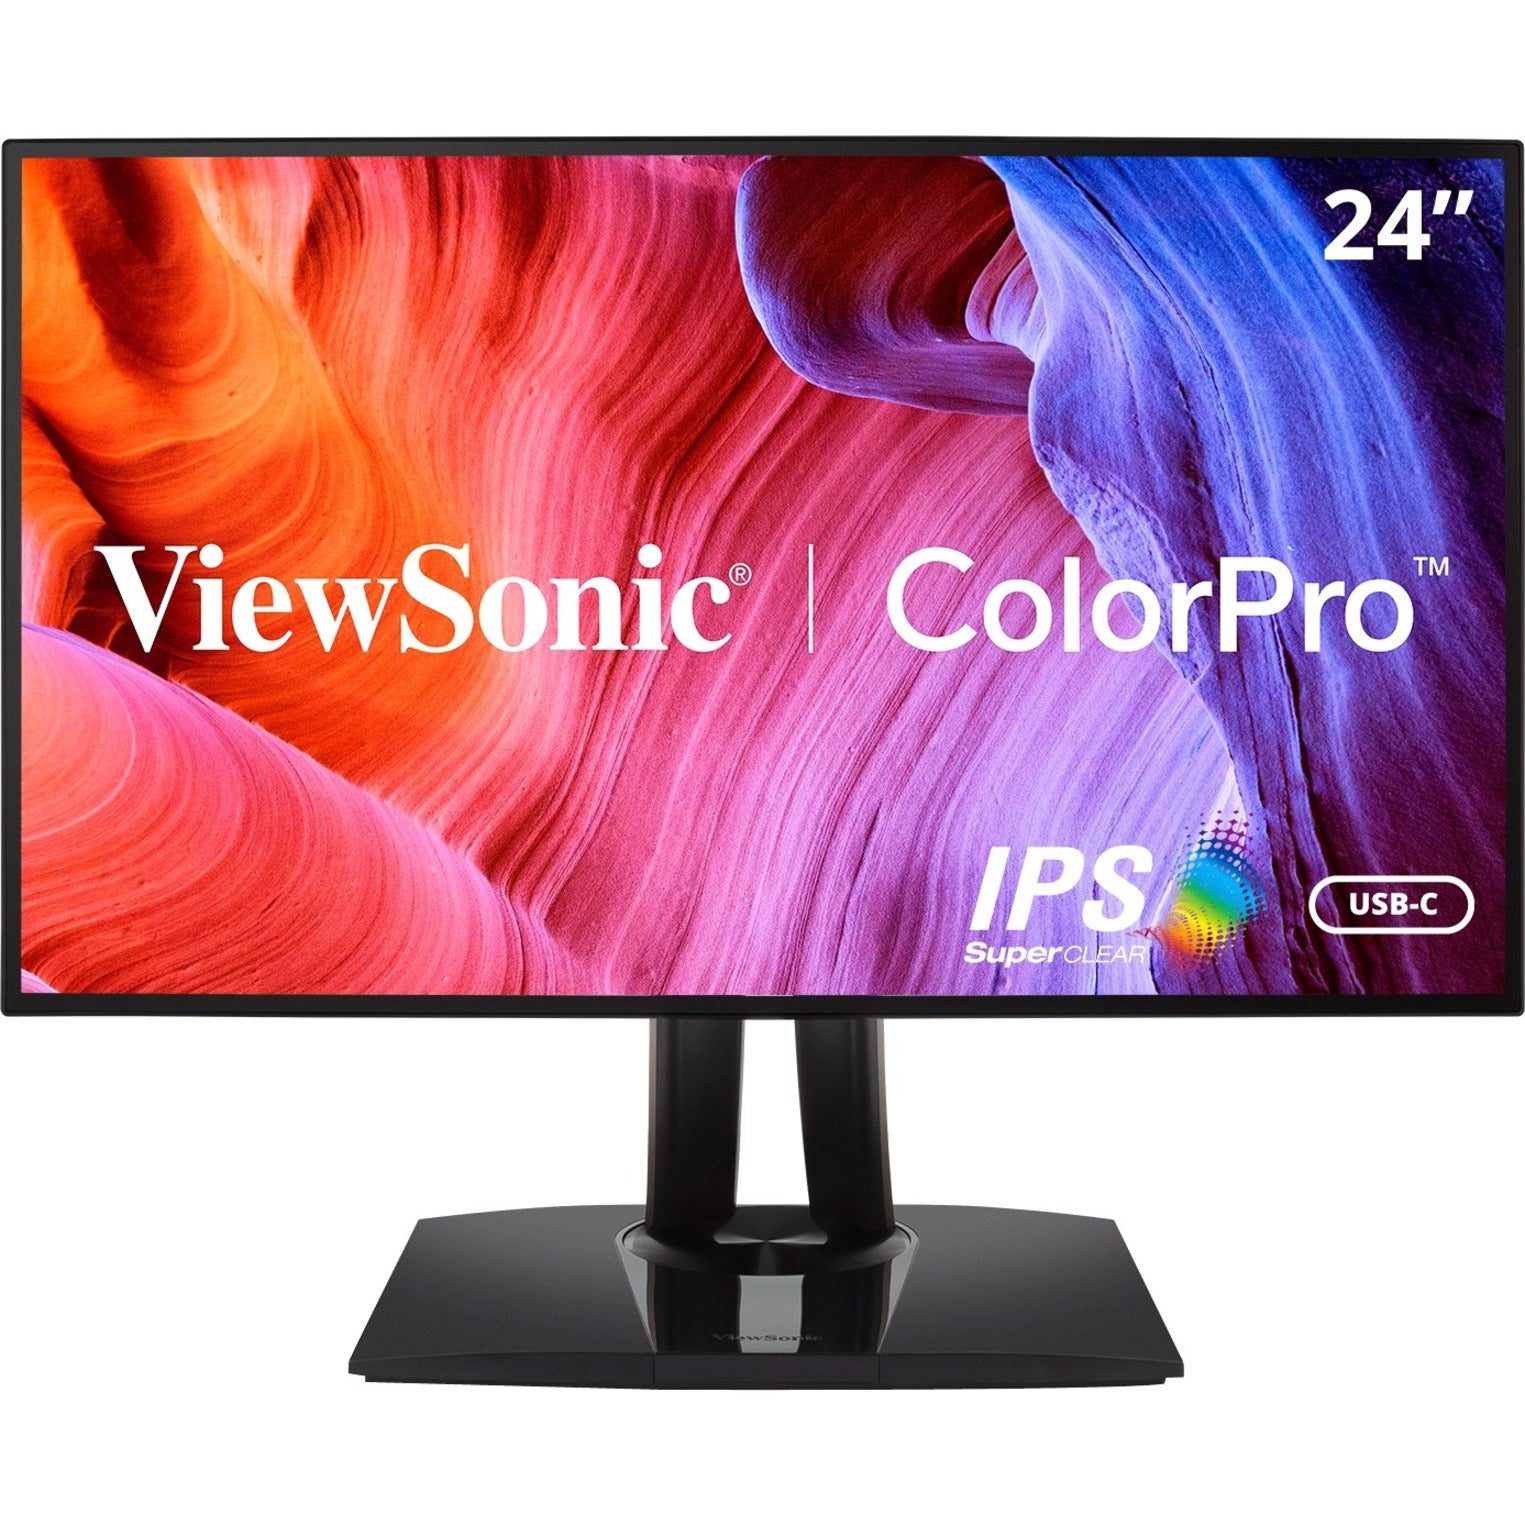 ViewSonic VP2468A 24 sRGB Color Accurate USB-C Monitor, 1920 x 1080 Resolution